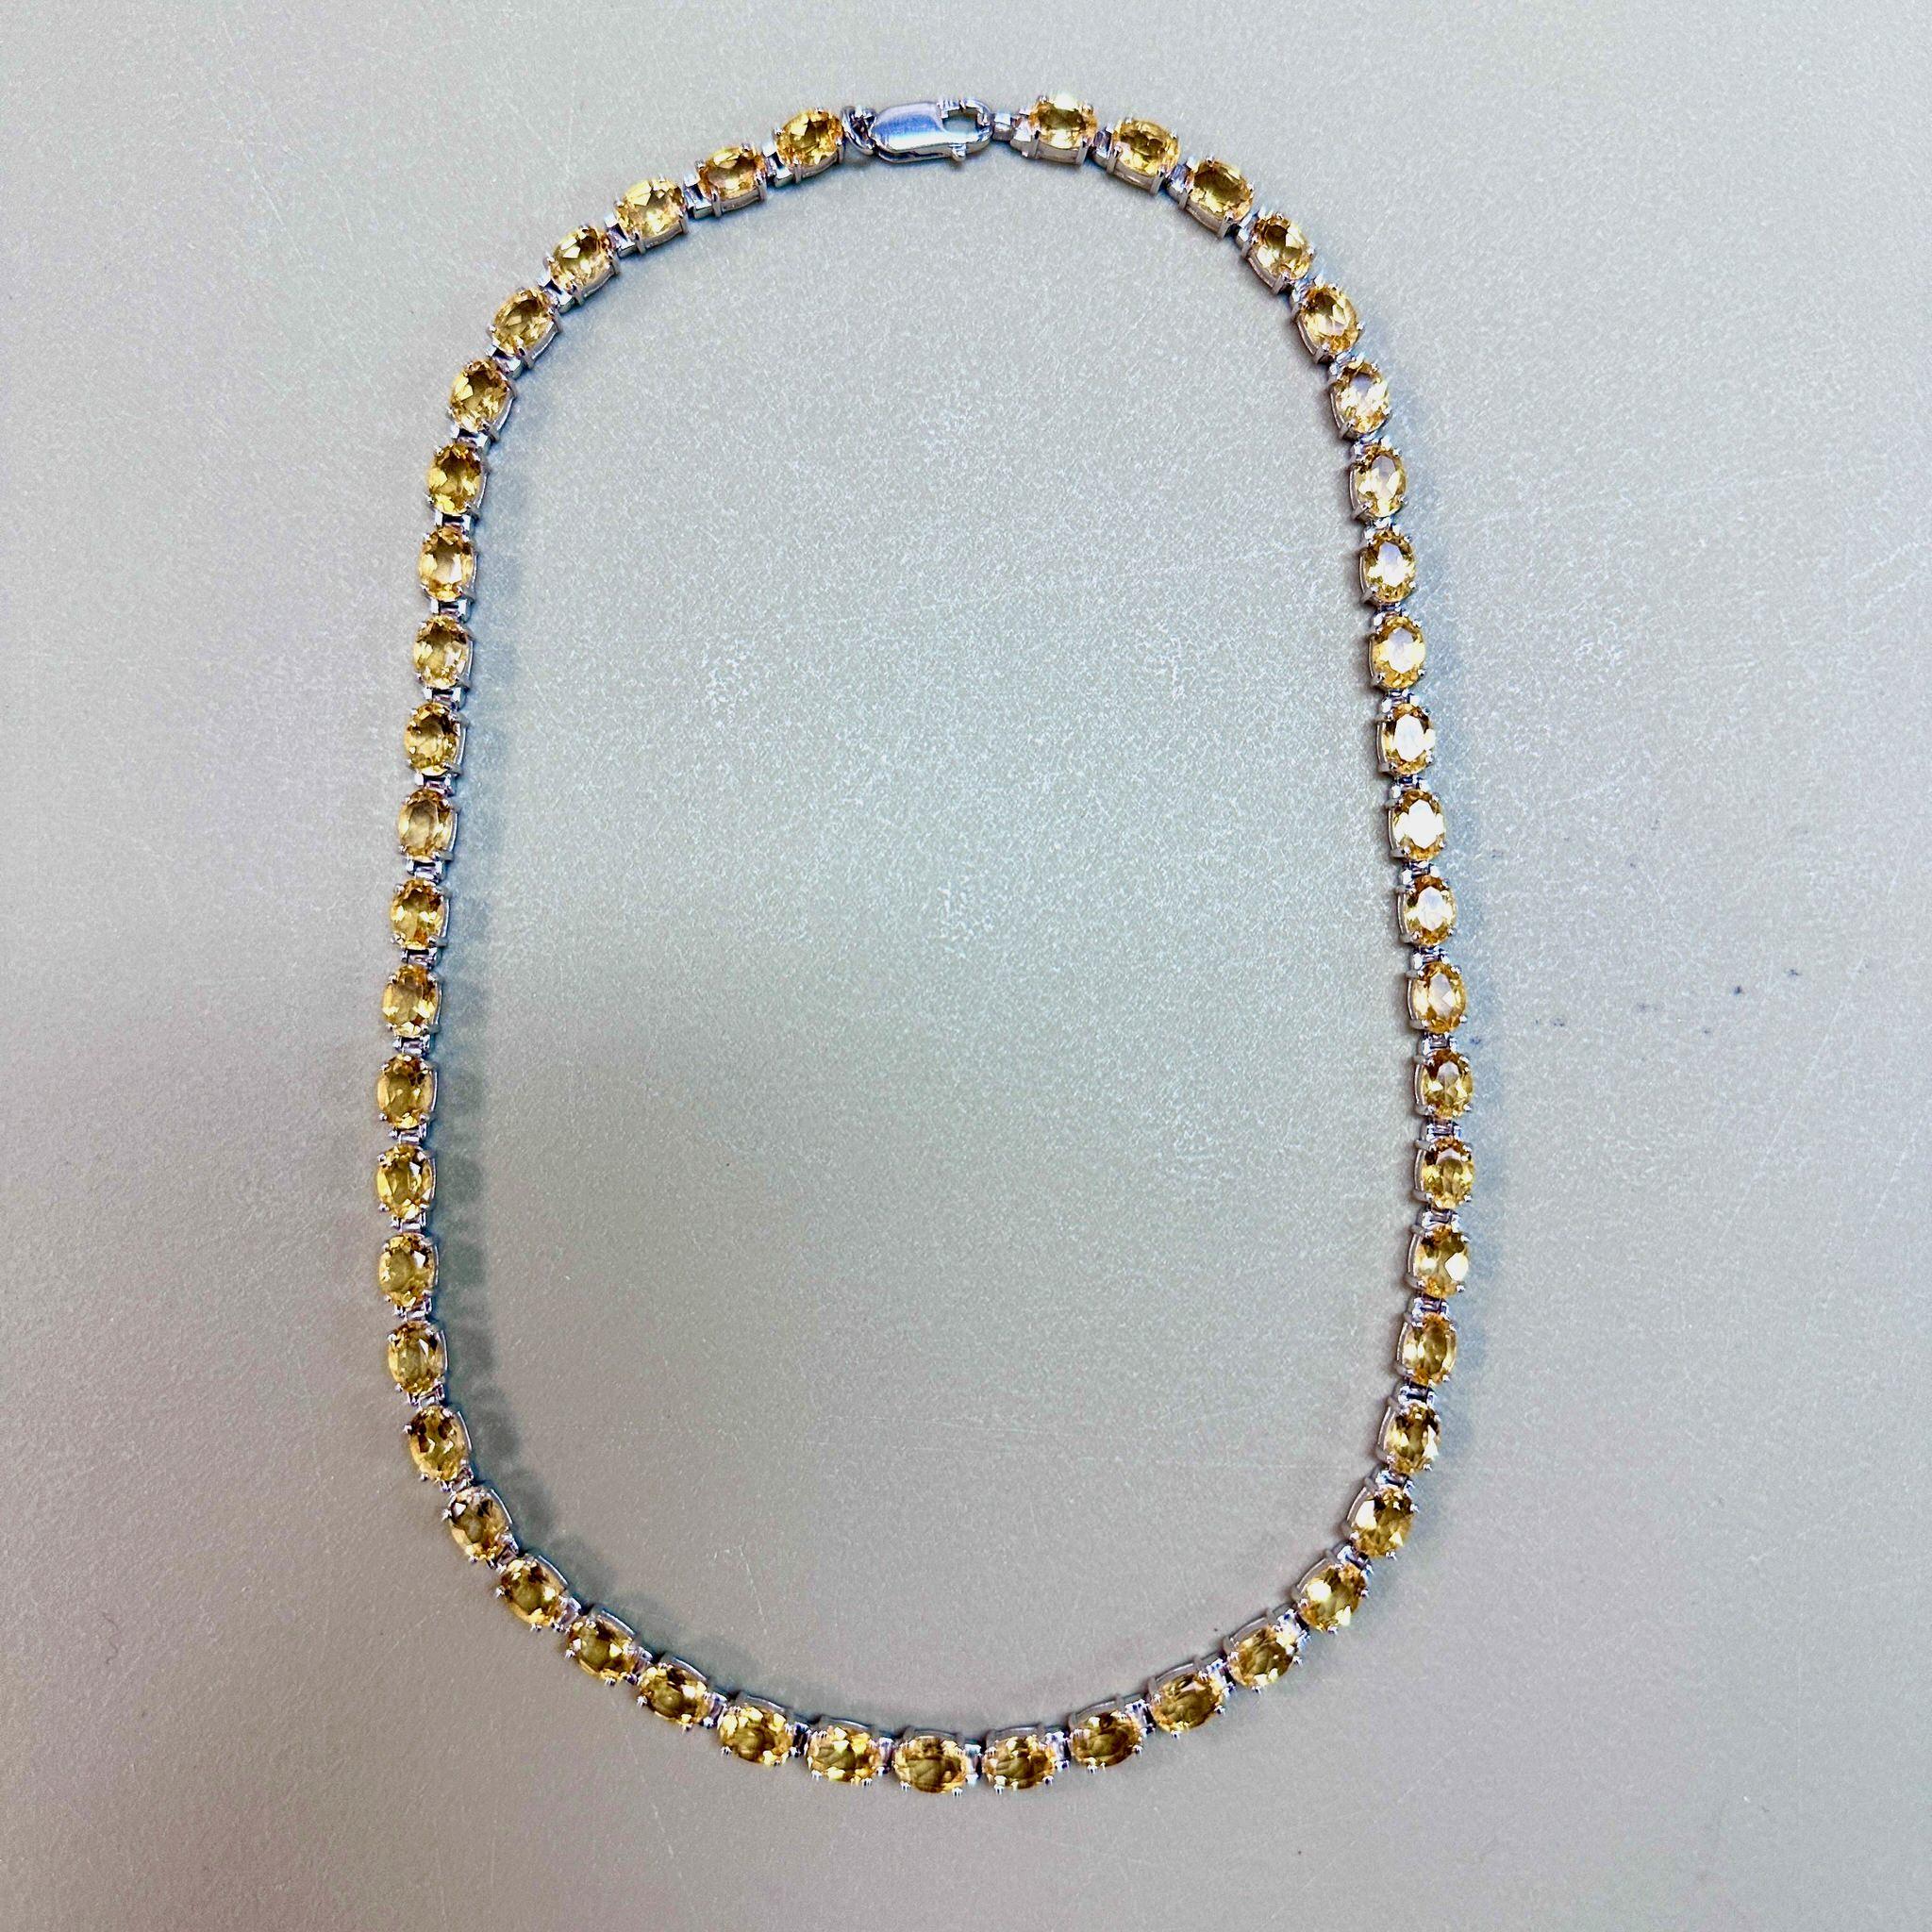 It comes with the appraisal by GIA GG/AJP
Citrine = 39.20 Carats ( 7 x 5 mm )
Cut: Oval
Primary Stone Color: Yellow
Total Quantity of Citrine: 49
Clasp :Lobster Claw Clasps
Metal: Sterling Silver